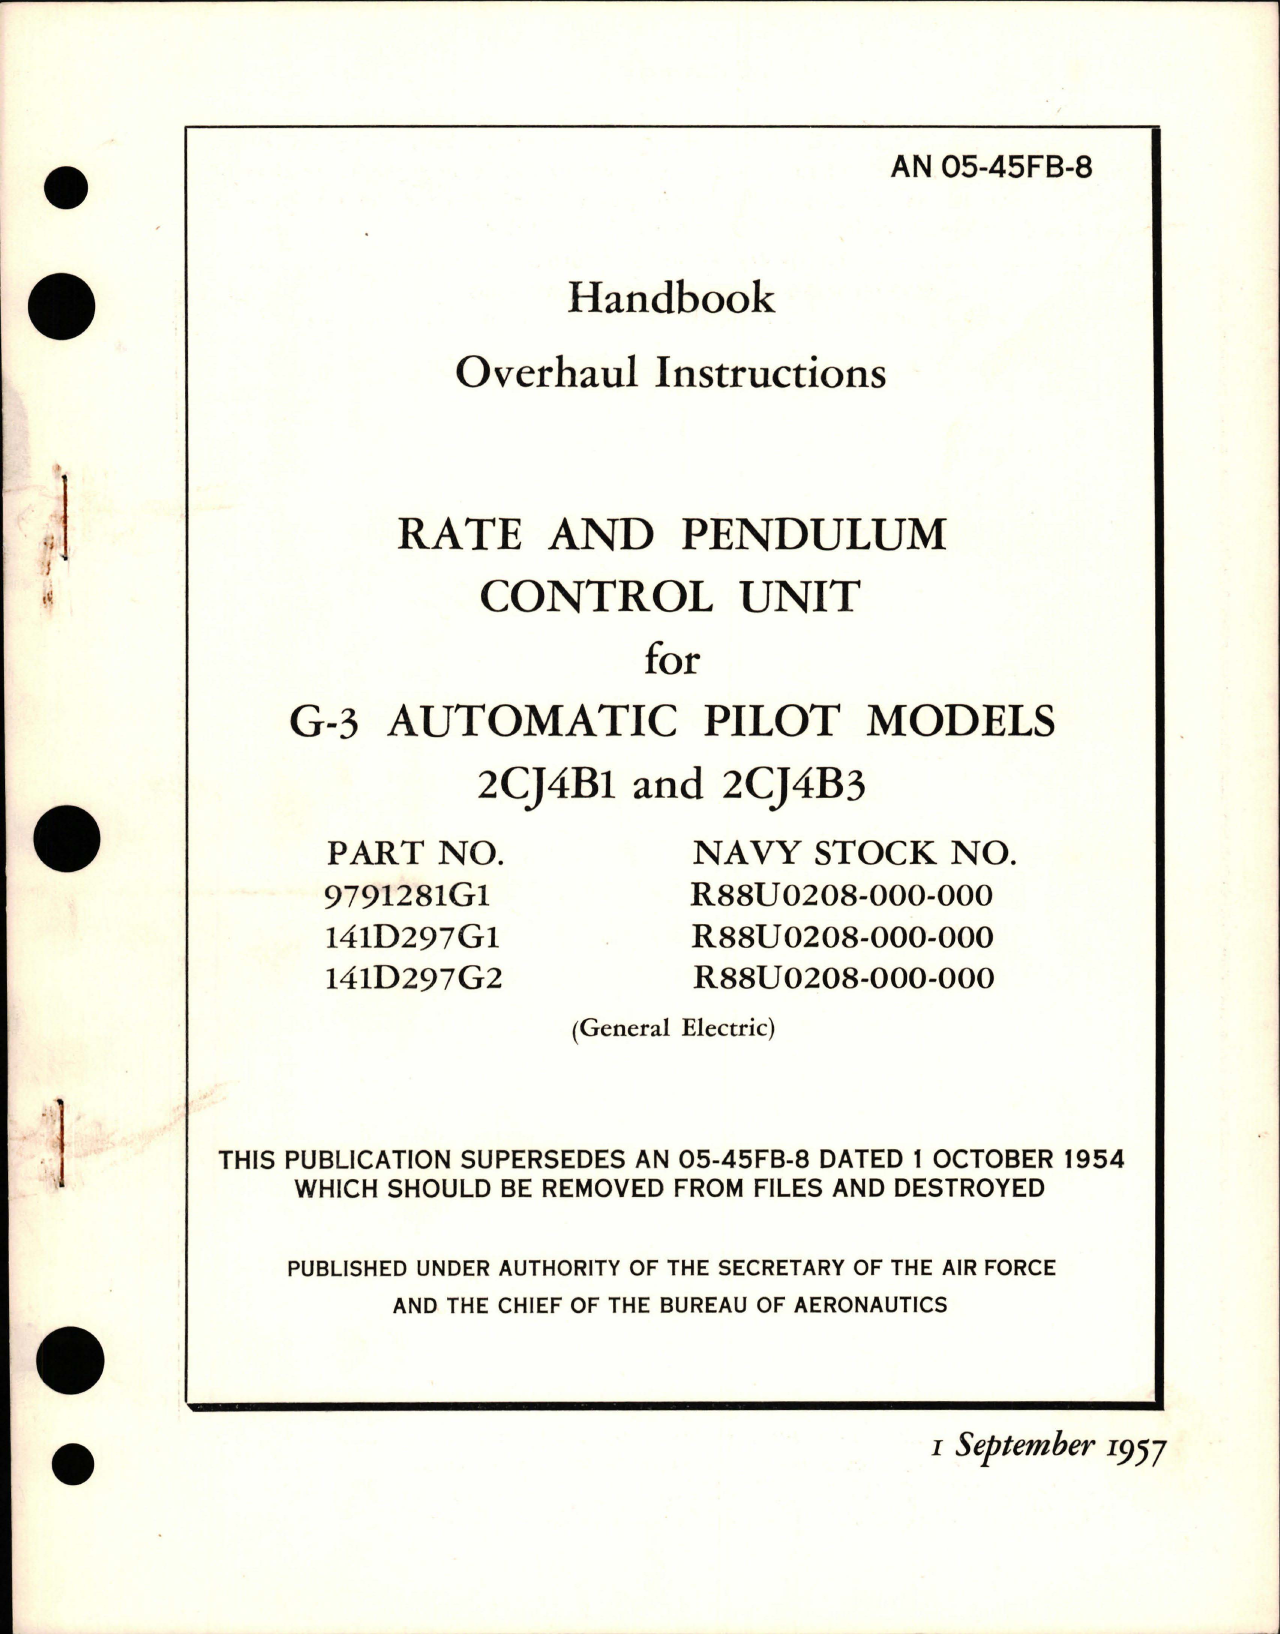 Sample page 1 from AirCorps Library document: Overhaul Instructions for Rate and Pendulum Control Unit for G3 Automatic Pilot - Models 2CJ4B1 and 2CJ4B3 